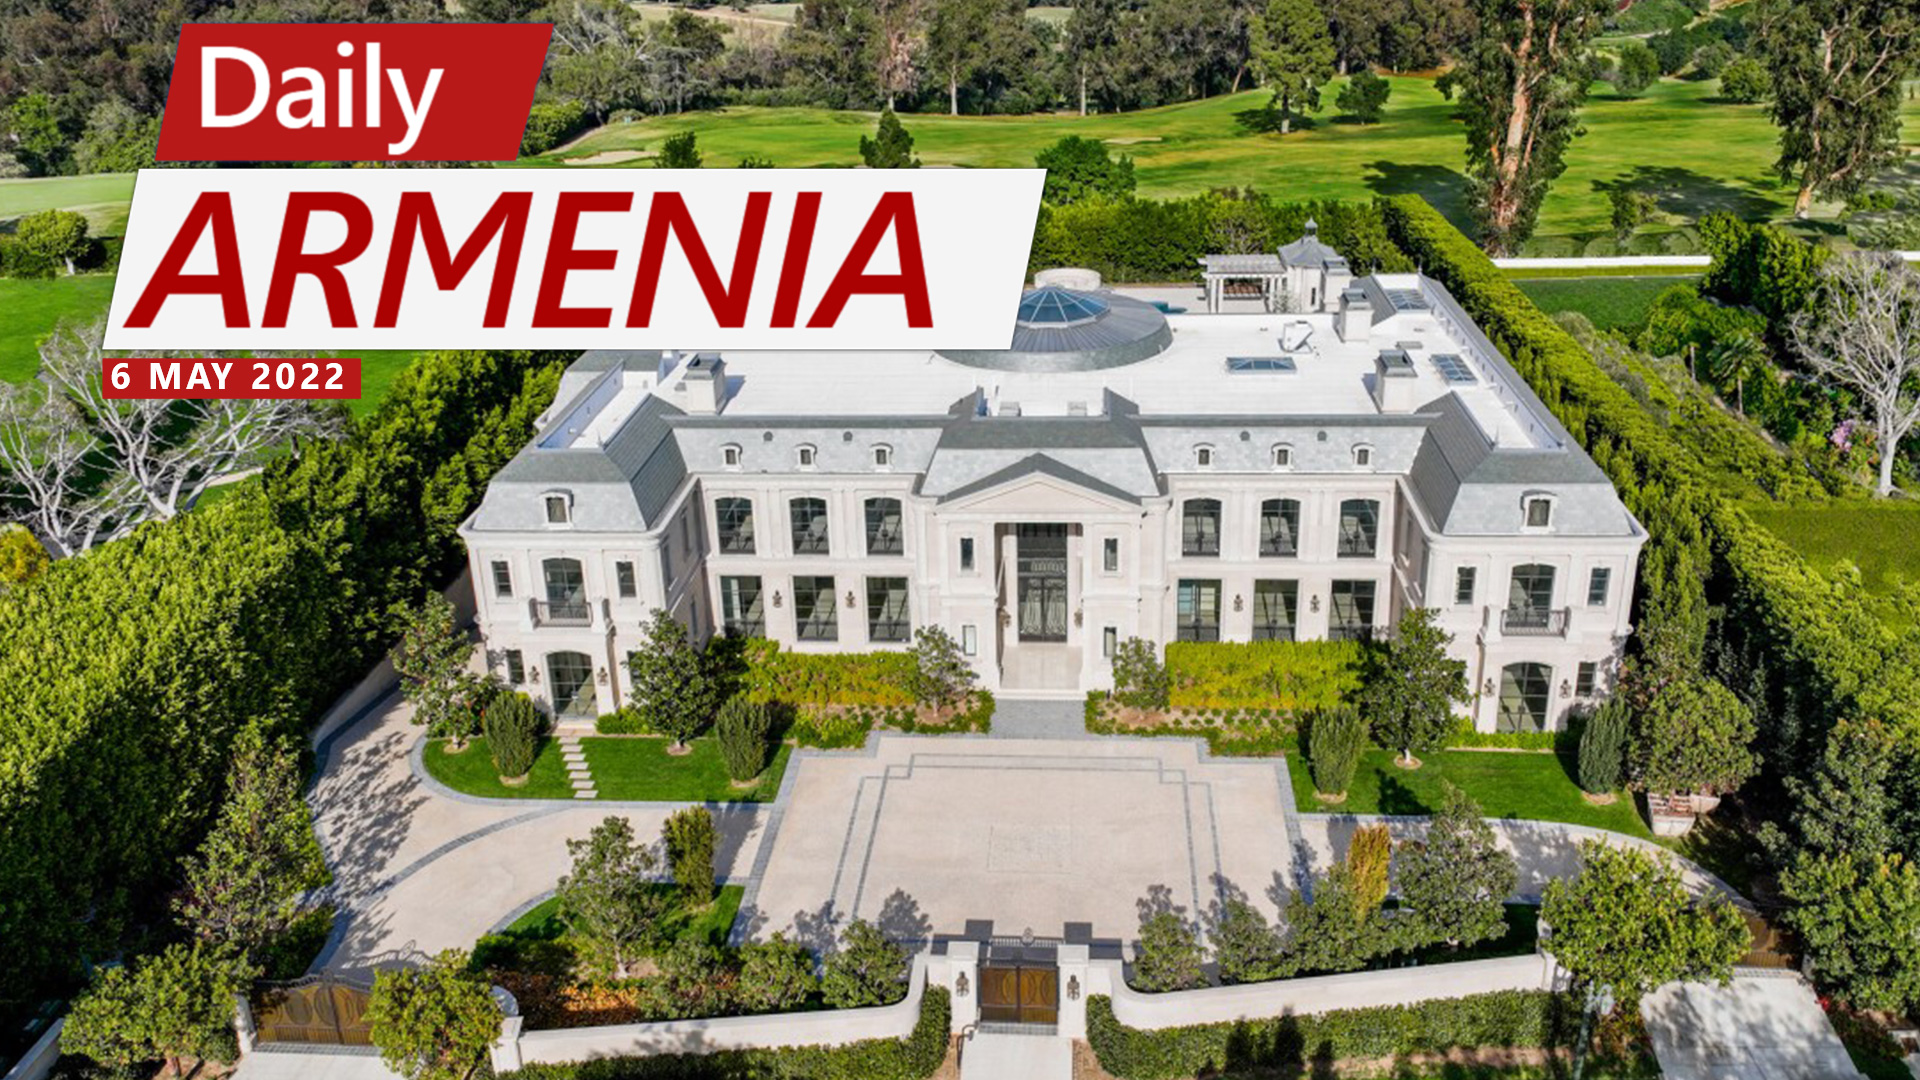 $60 million LA mansion owned by former Armenian Minister to be confiscated by US Justice Department